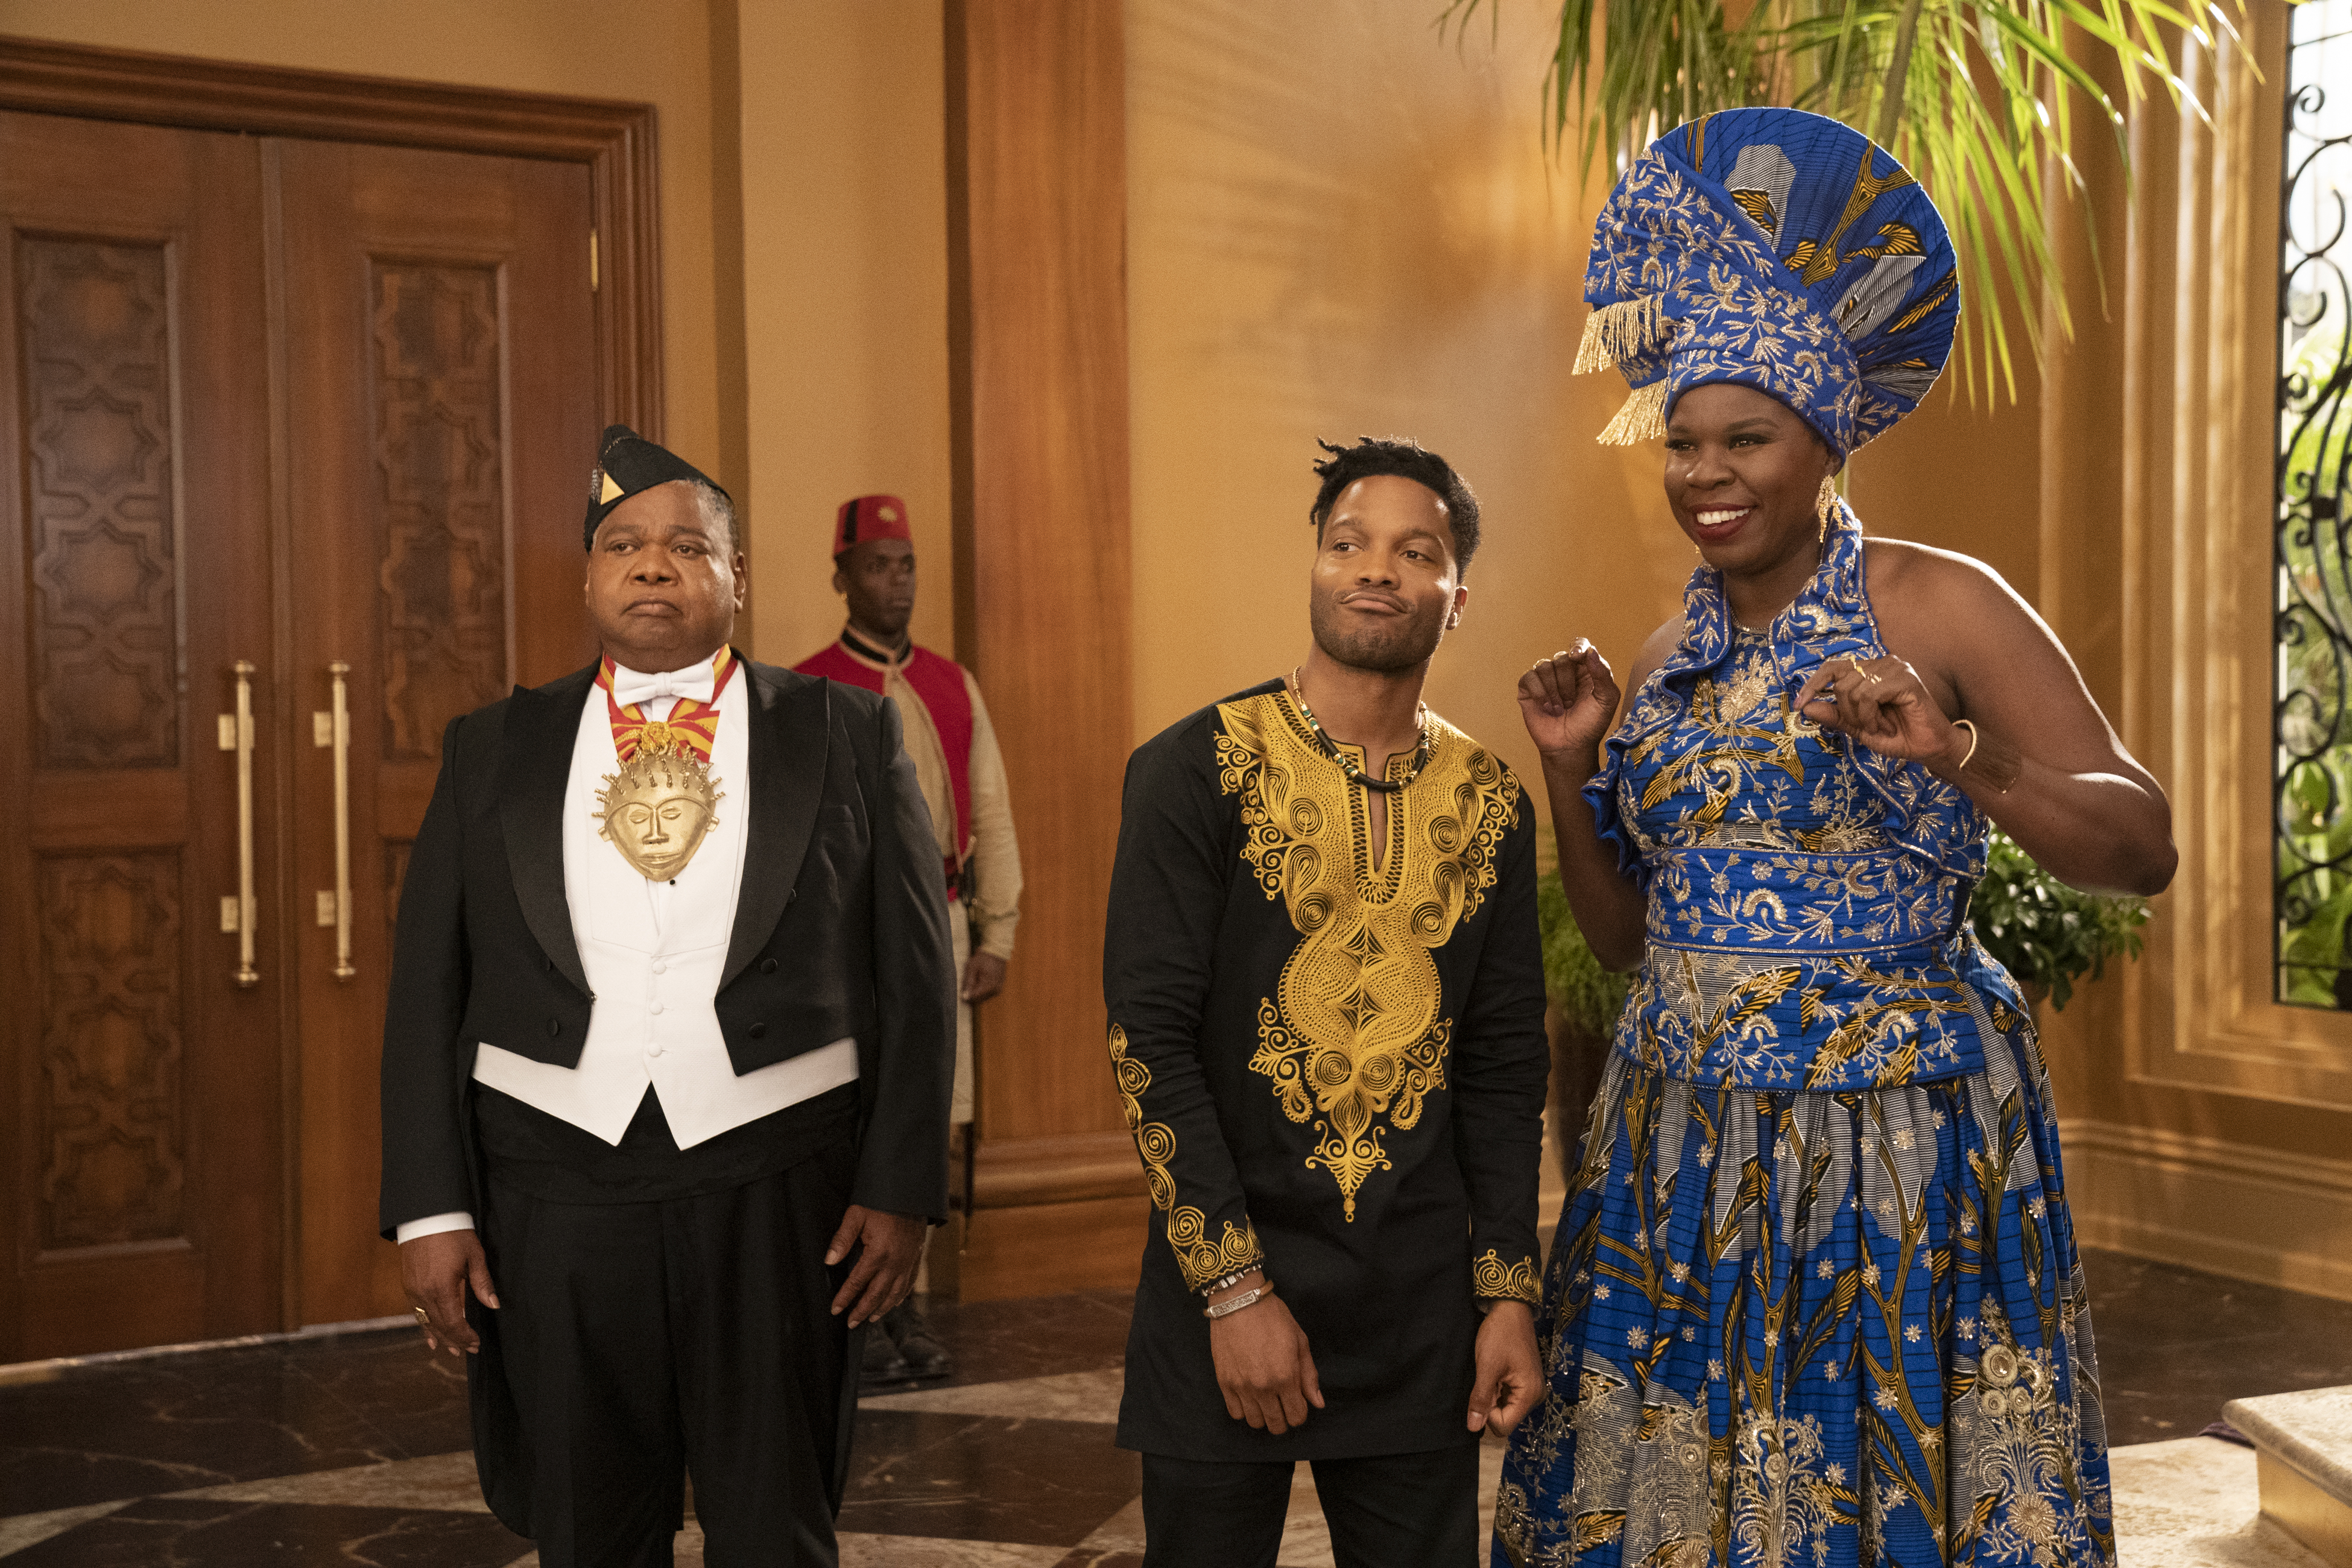 Watch The 2nd Trailler For 'Coming 2 America' Starring Eddie Murphy